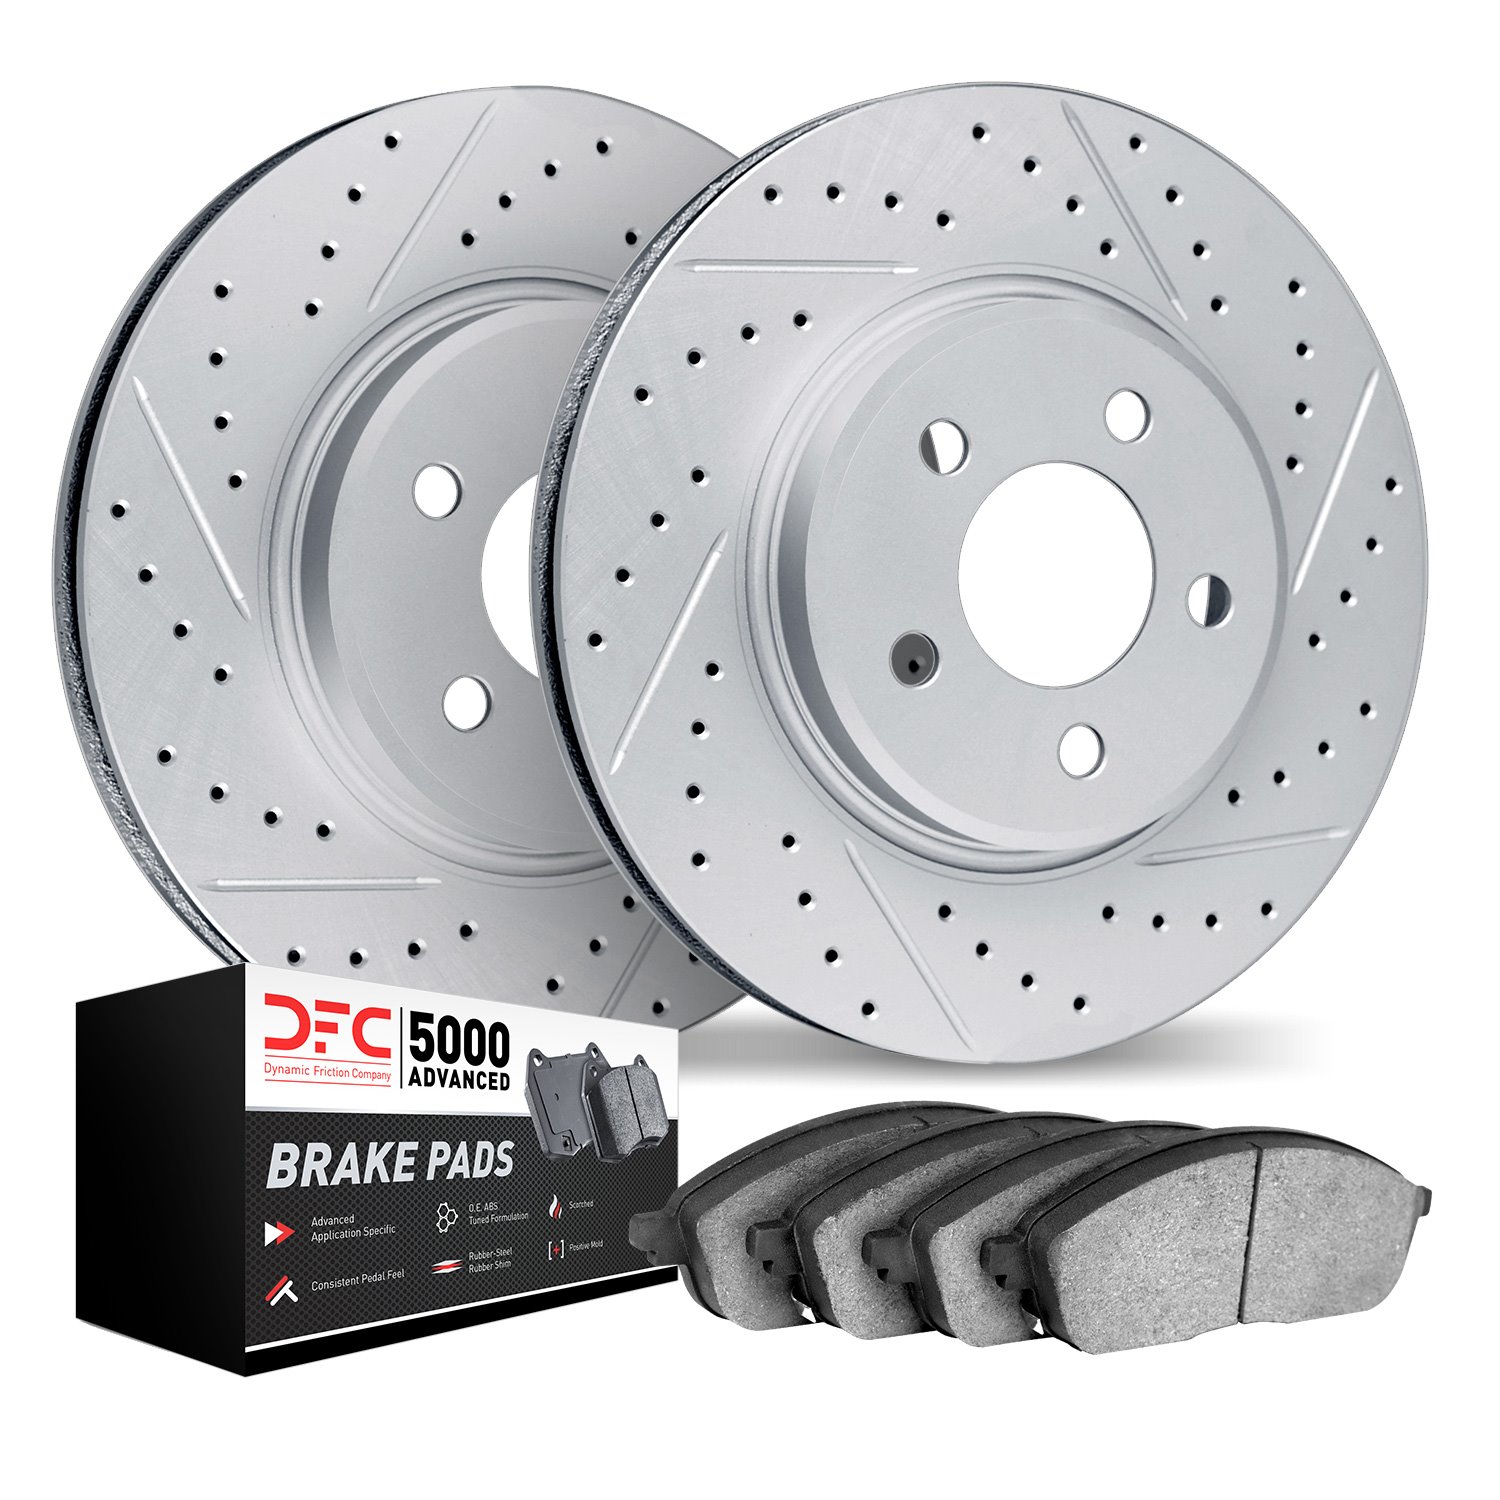 2502-46055 Geoperformance Drilled/Slotted Rotors w/5000 Advanced Brake Pads Kit, 2019-2019 GM, Position: Front